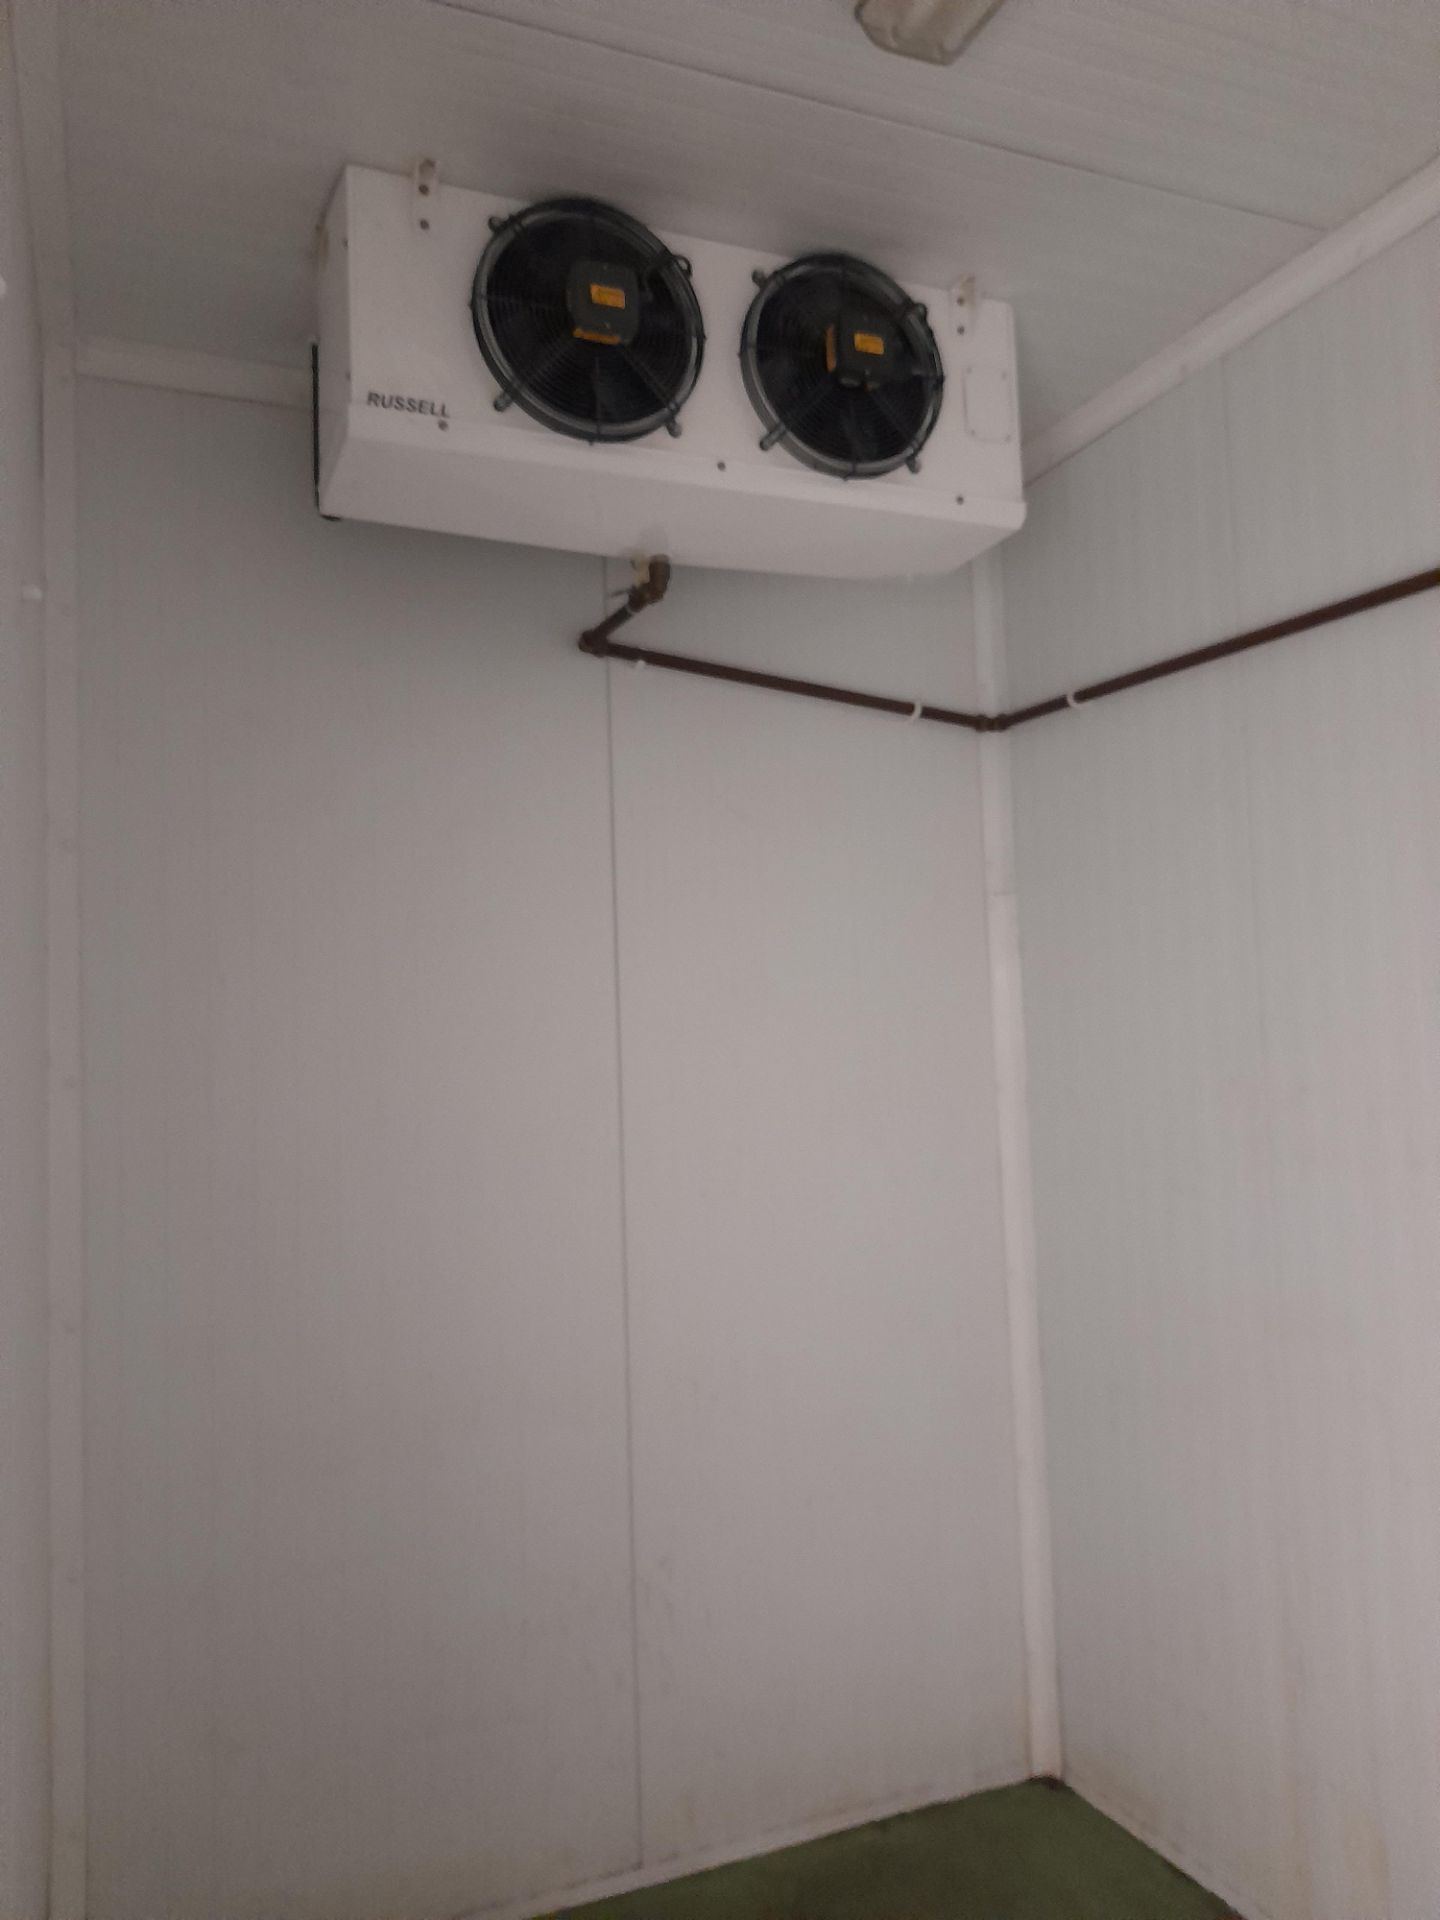 Twin Modular Fabricated Chill Room – Room 6 approx. 8m x 4.5m with 1 x Russell 3 fan chiller, Room 7 - Image 5 of 5